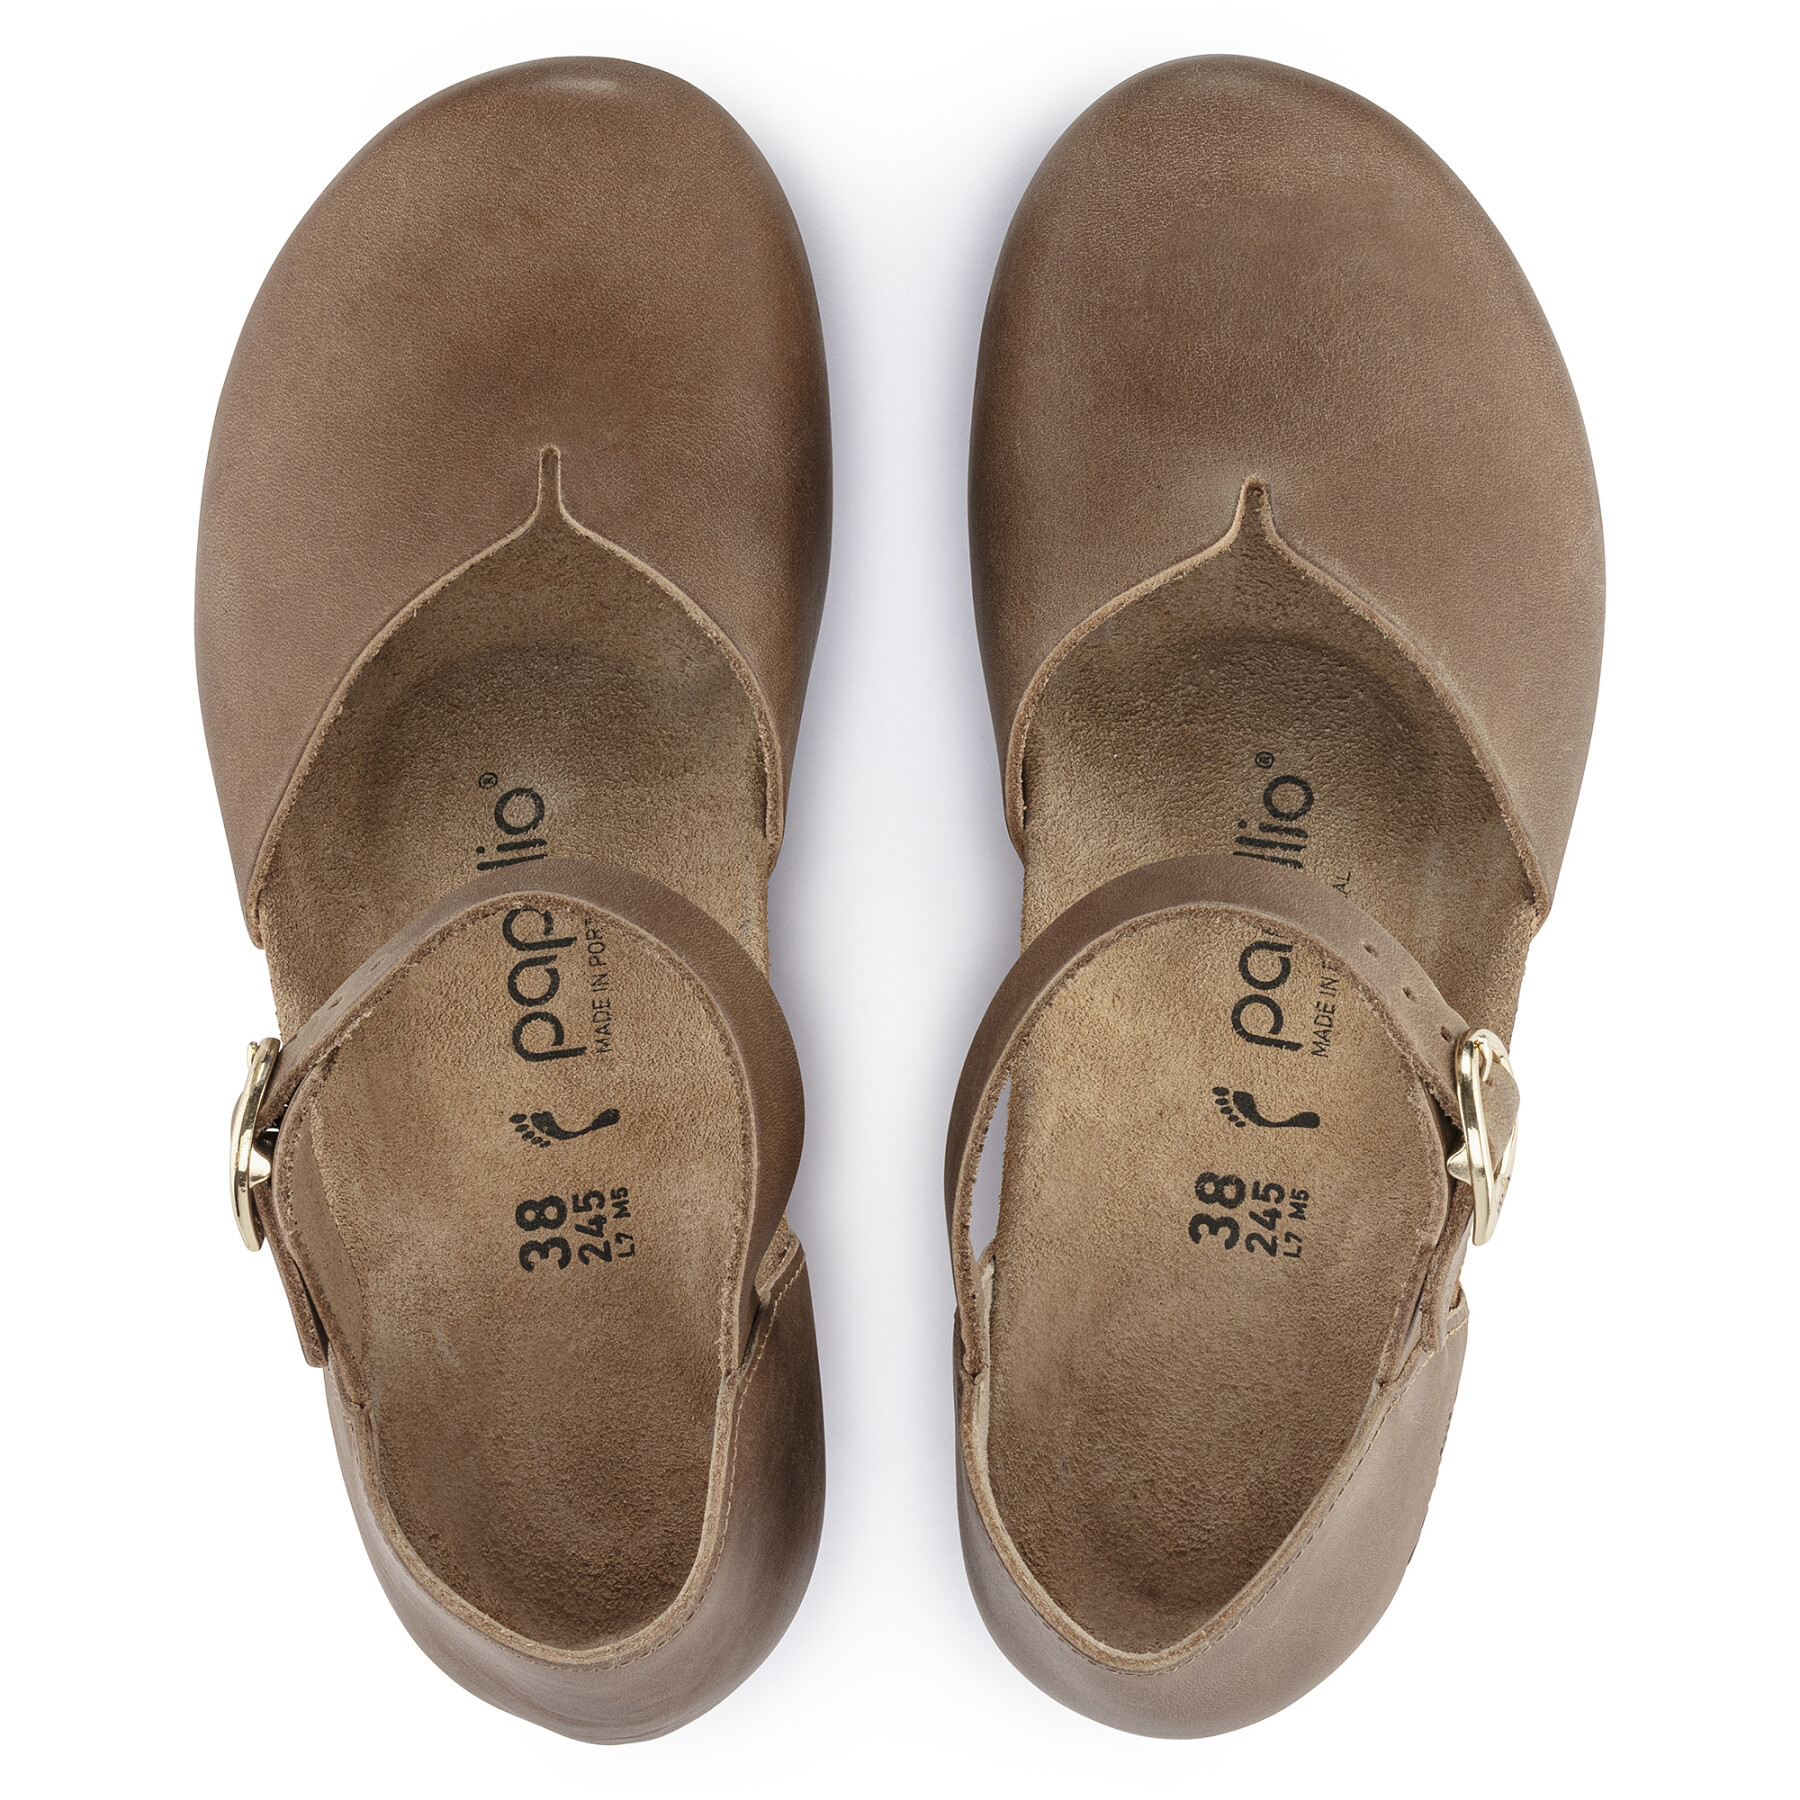 Bombas slim para mujer Birkenstock Mary Ring-Buckle Natural Leather